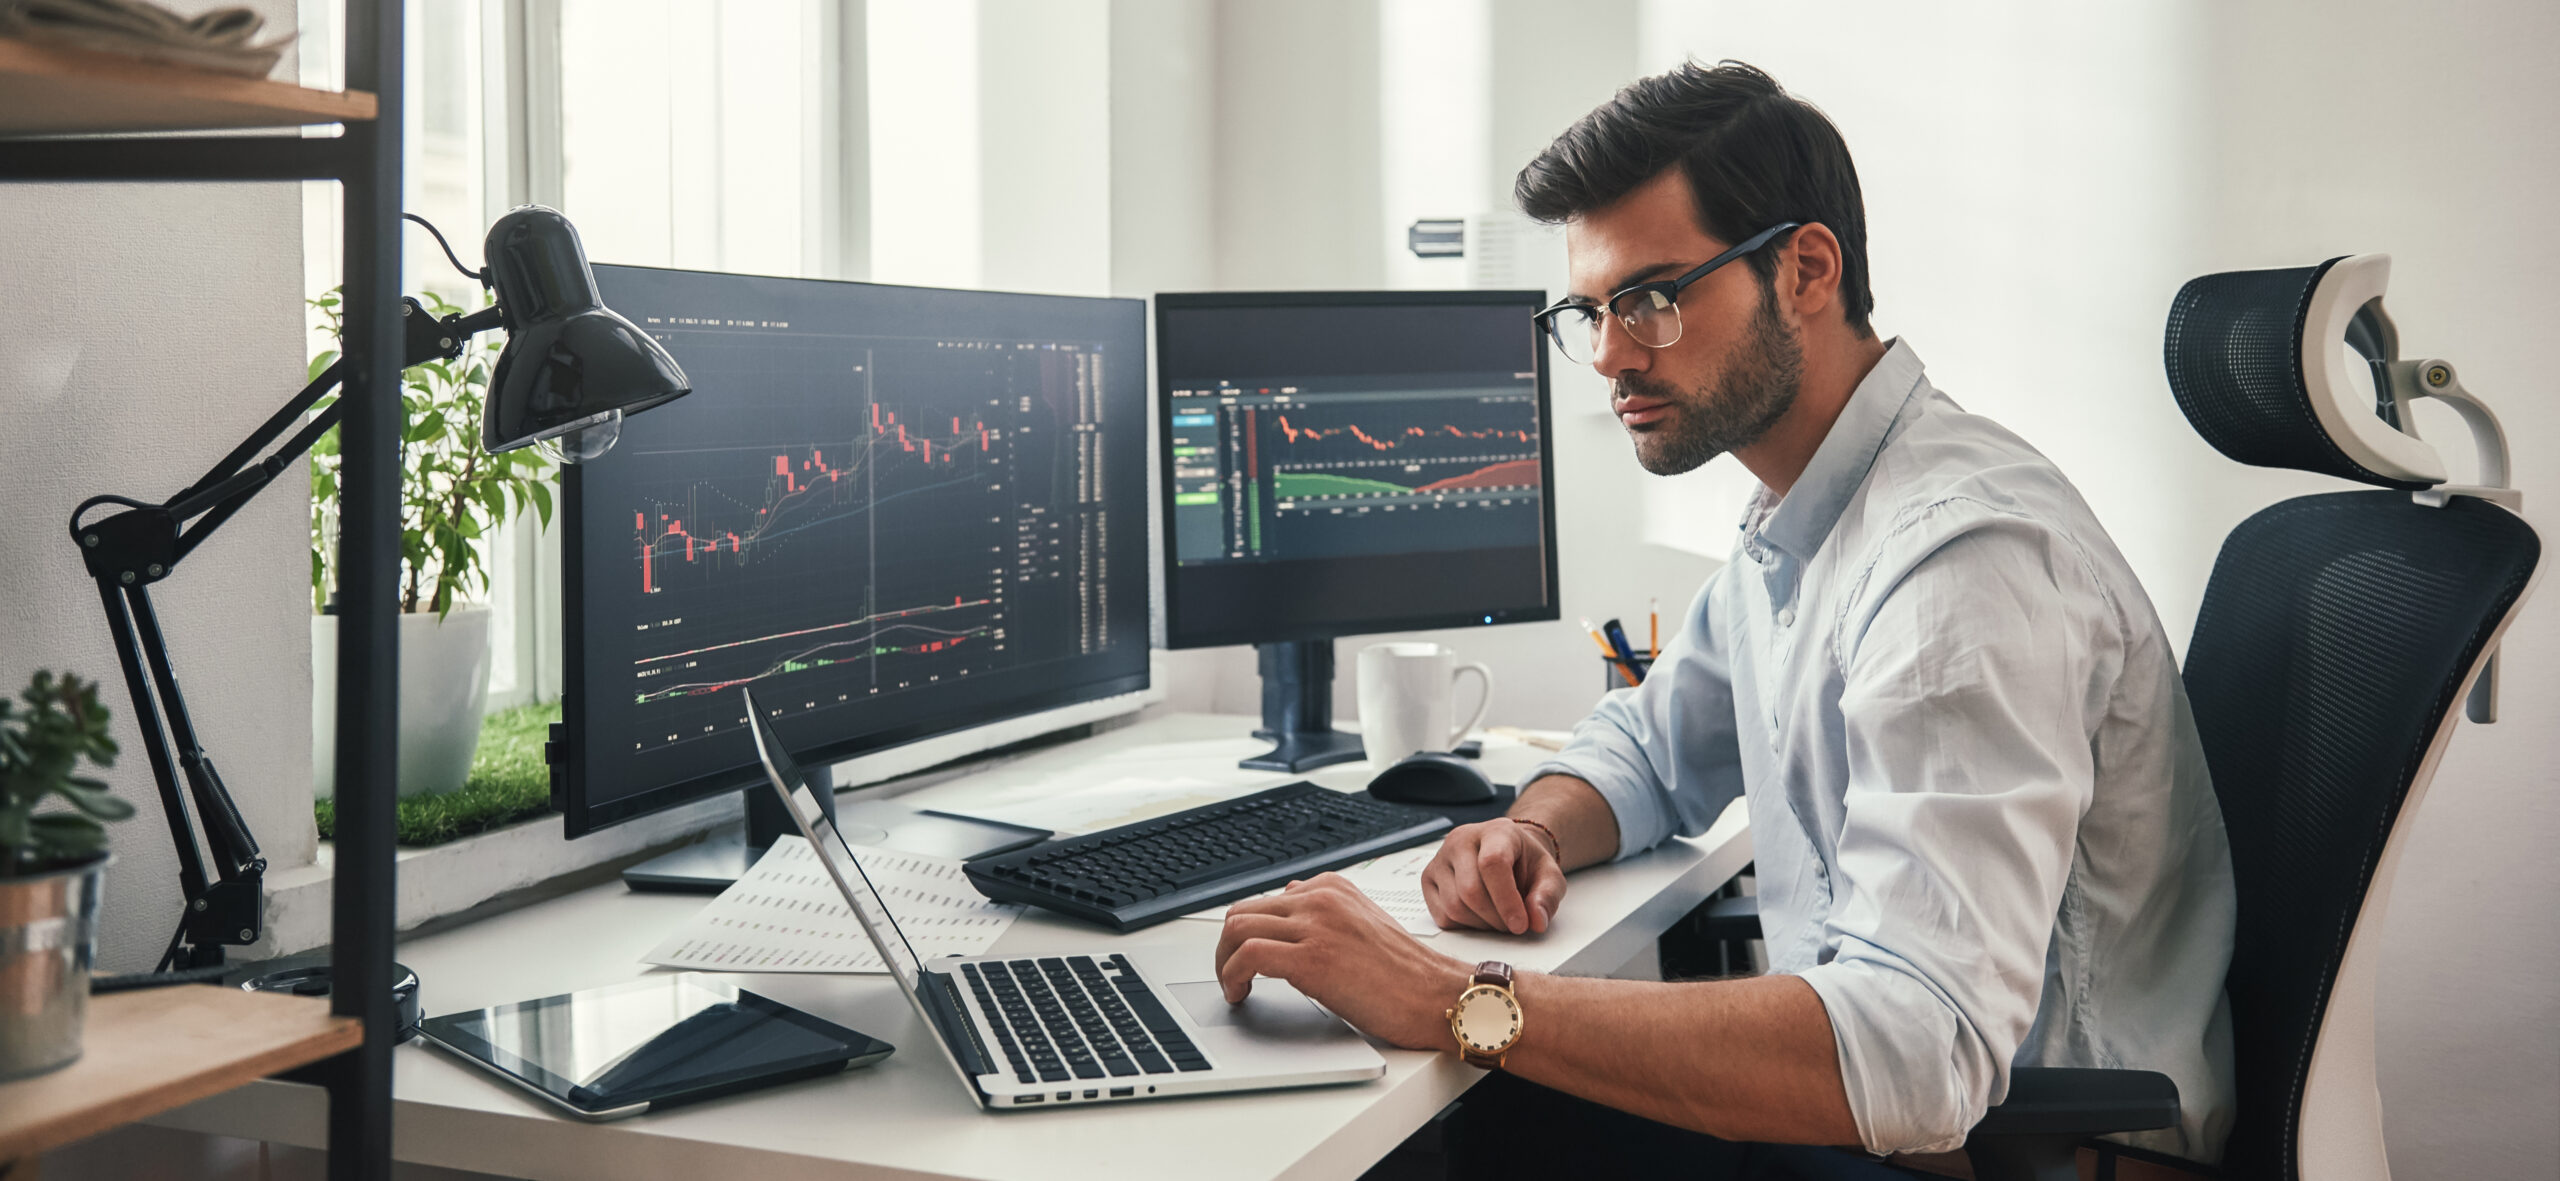 Tradiso trading platform helps trading brokers and traders make money